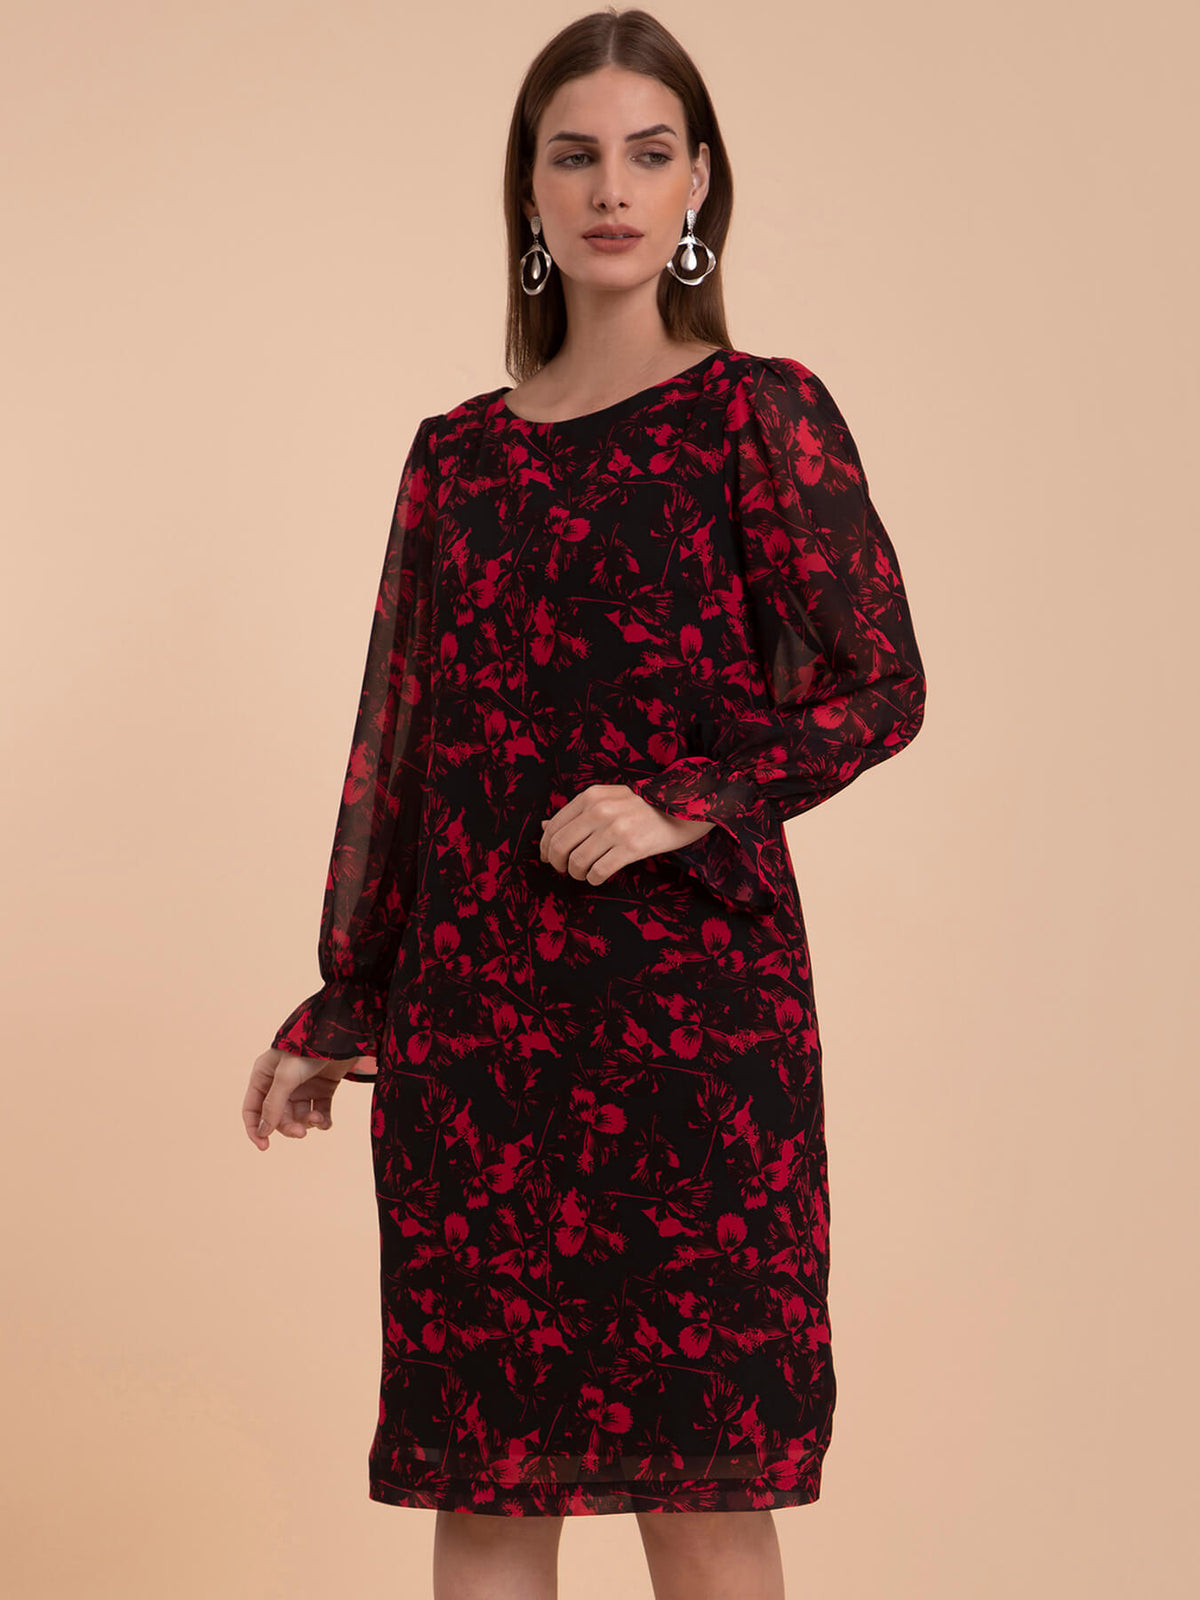 Georgette Boat Neck Shift Dress - Red And Black